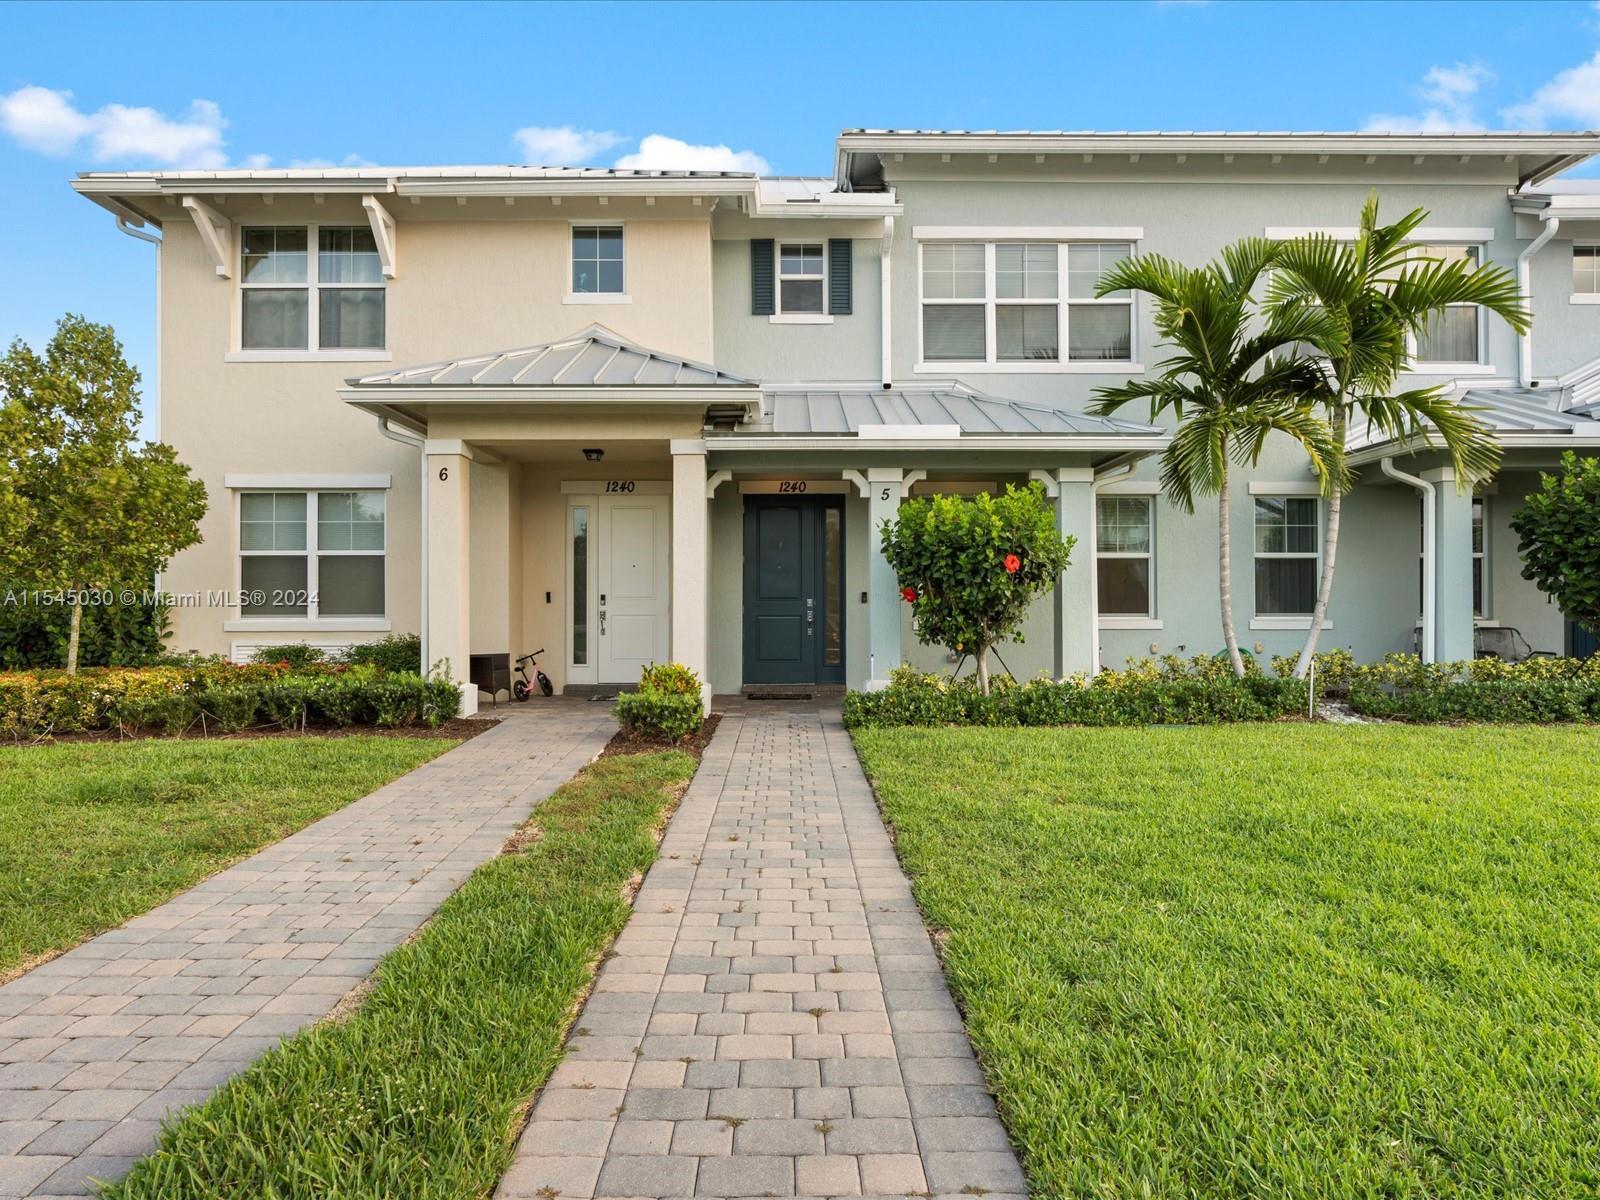 Photo of 1240 Eucalyptus Dr #5 in Hollywood, FL